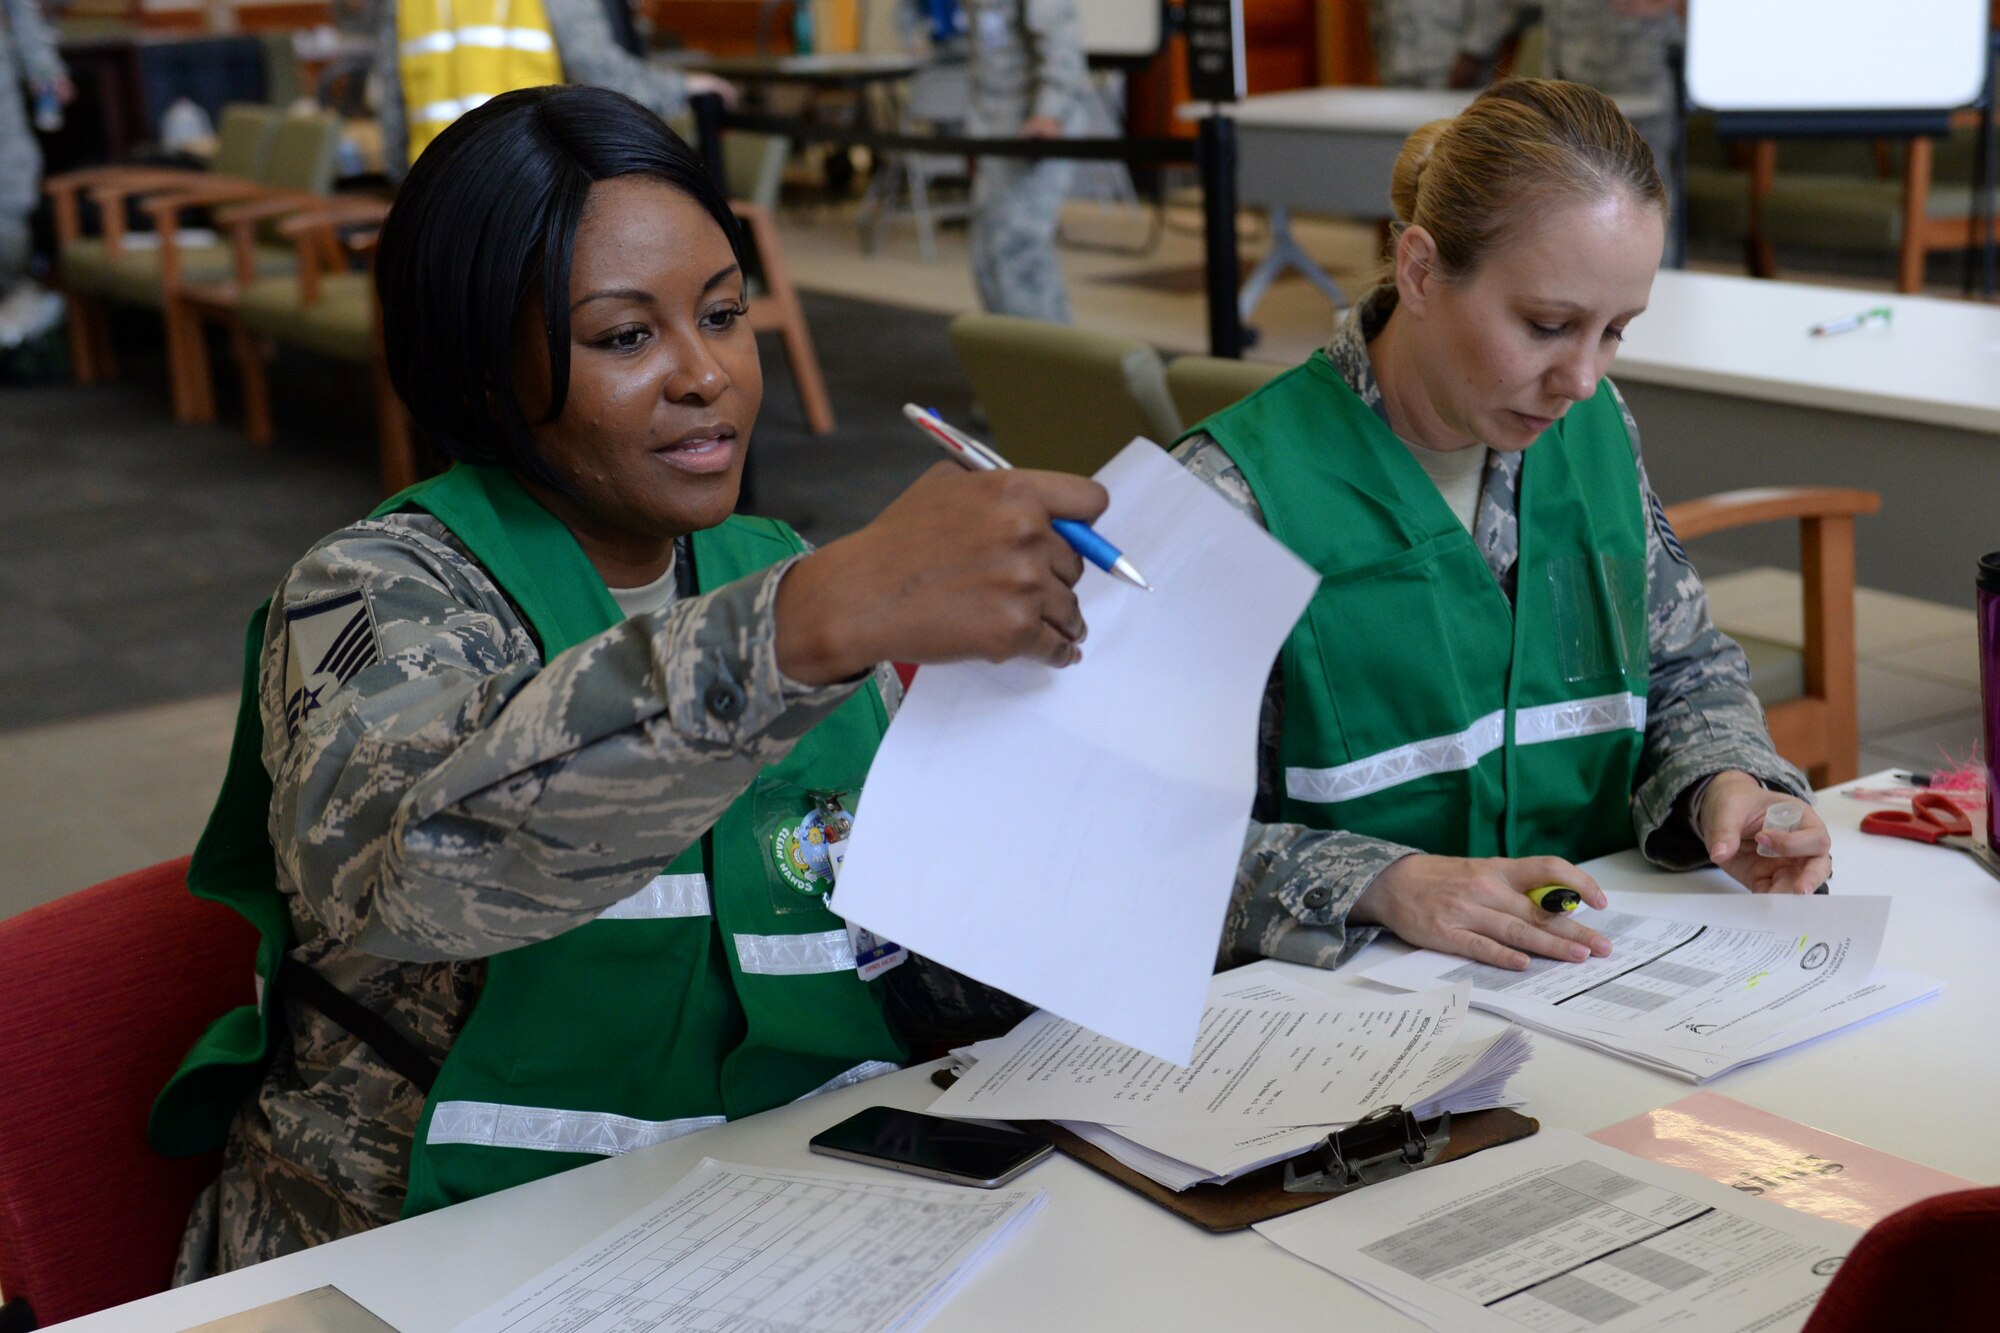 U.S. Air Force Master Sgt. Ukeia Carter, 36th Medical Support Squadron superintendent, left, and Tech. Sgt. Gretchen Hopper, 36th MDSS TRICARE operations and patient administration flight NCO in charge, check in patients during a typhoon recovery exercise June 6, 2016, at Andersen Air Force Base, Guam. The 36th Medical Group performed typhoon recovery response, to include flu o-utbreak mitigation, assessment of injured personnel and providing aid to large numbers of patients at one time. (U.S. Air Force photo by Airman 1st Class Alexa Ann Henderson/Released)